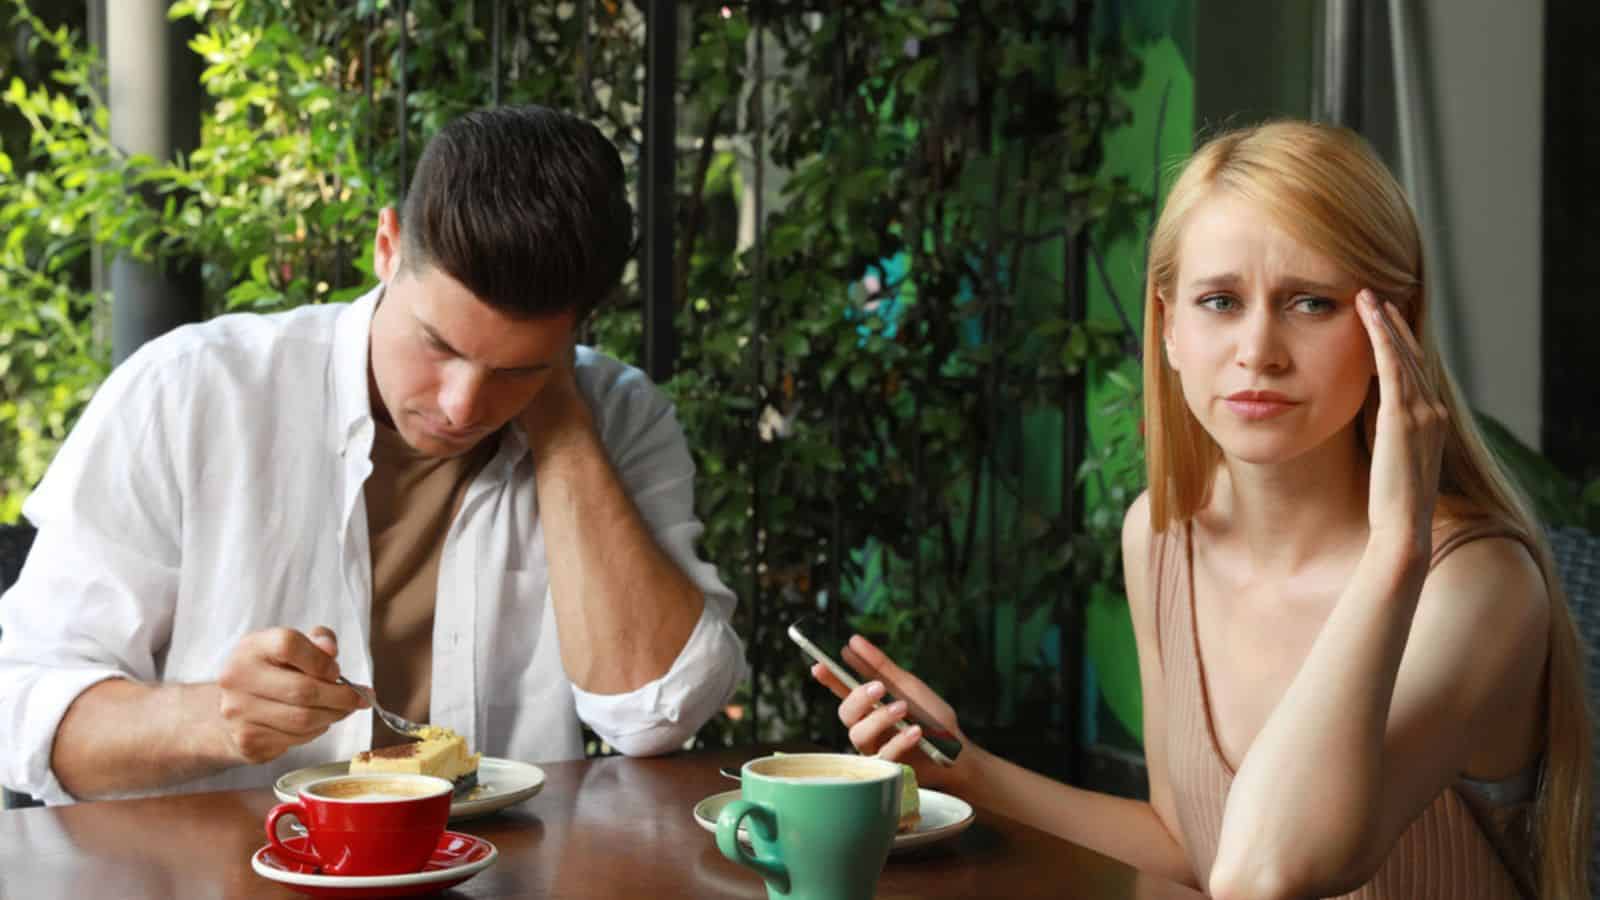 Woman with smartphone ignoring her boyfriend in outdoor cafe